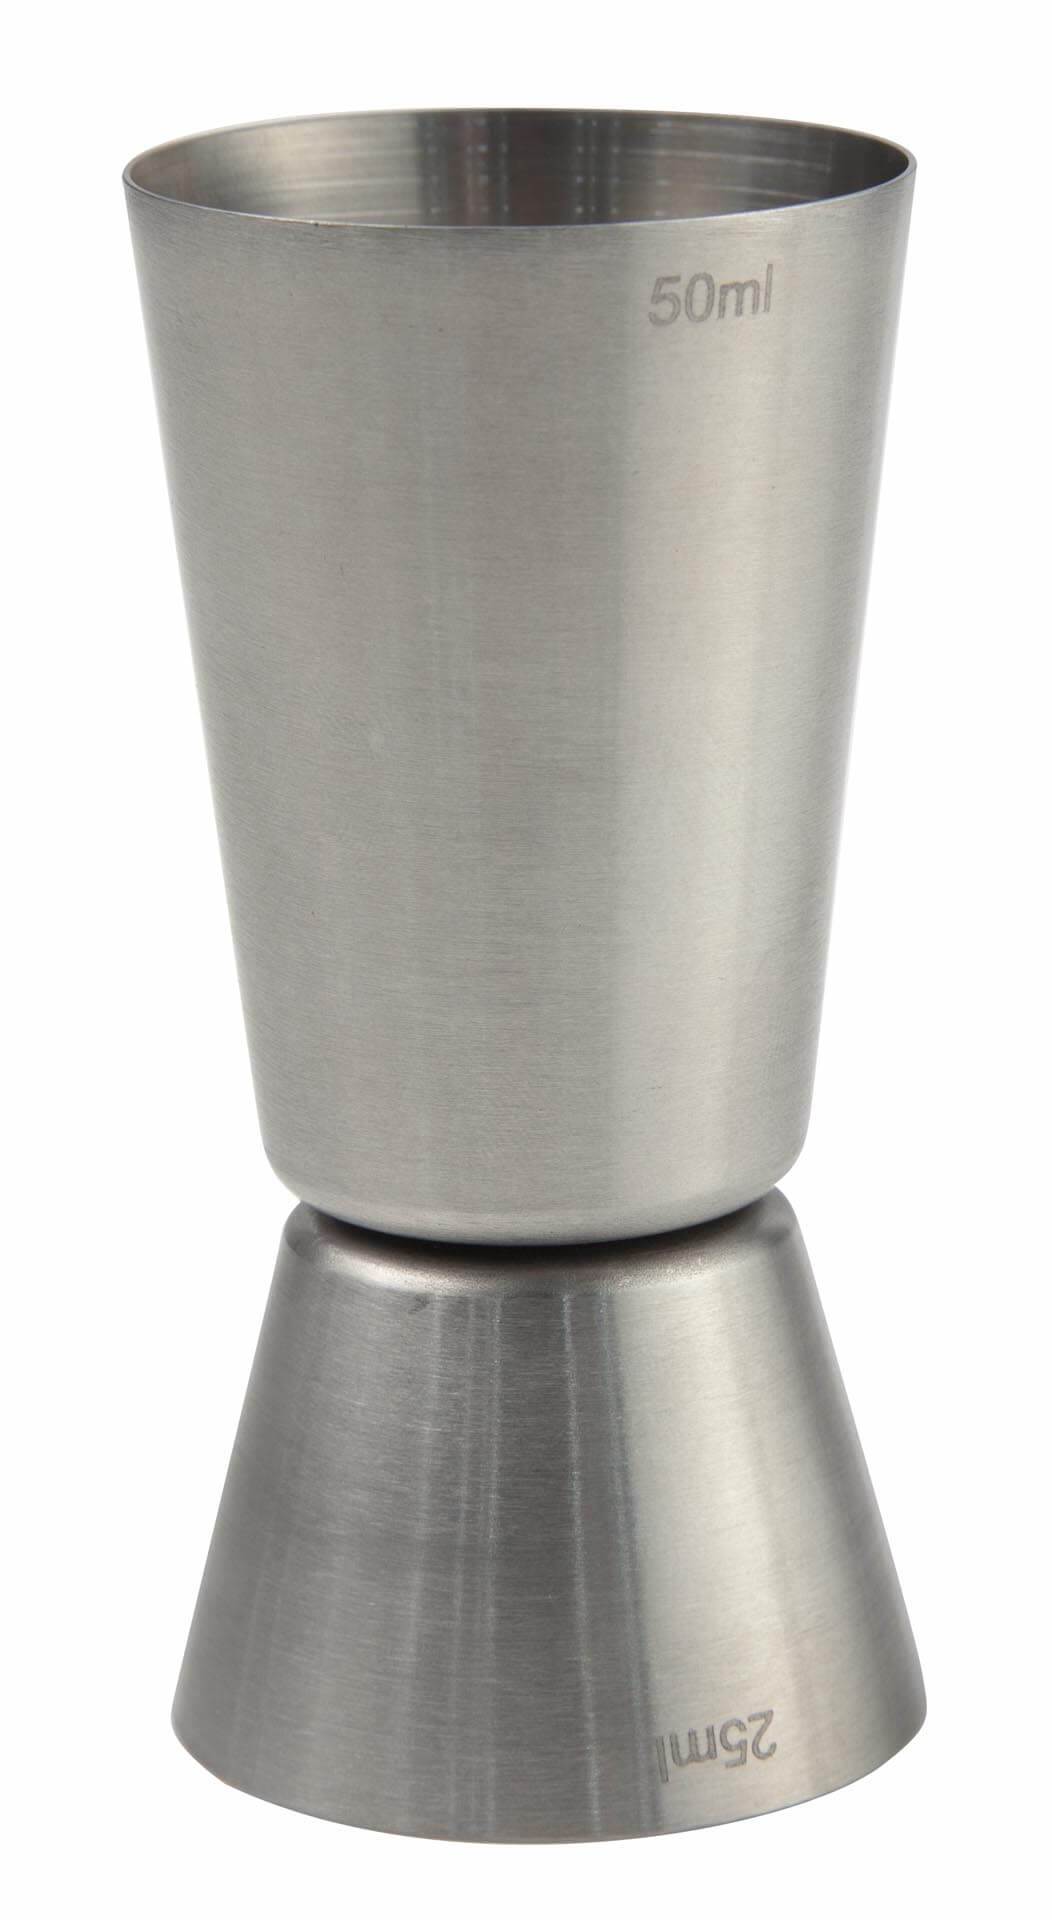 BEAUMONT 25/50ml PROFESSIONAL COCKTAIL JIGGER NOT GOVERNMENT STAMPED BAR-3178